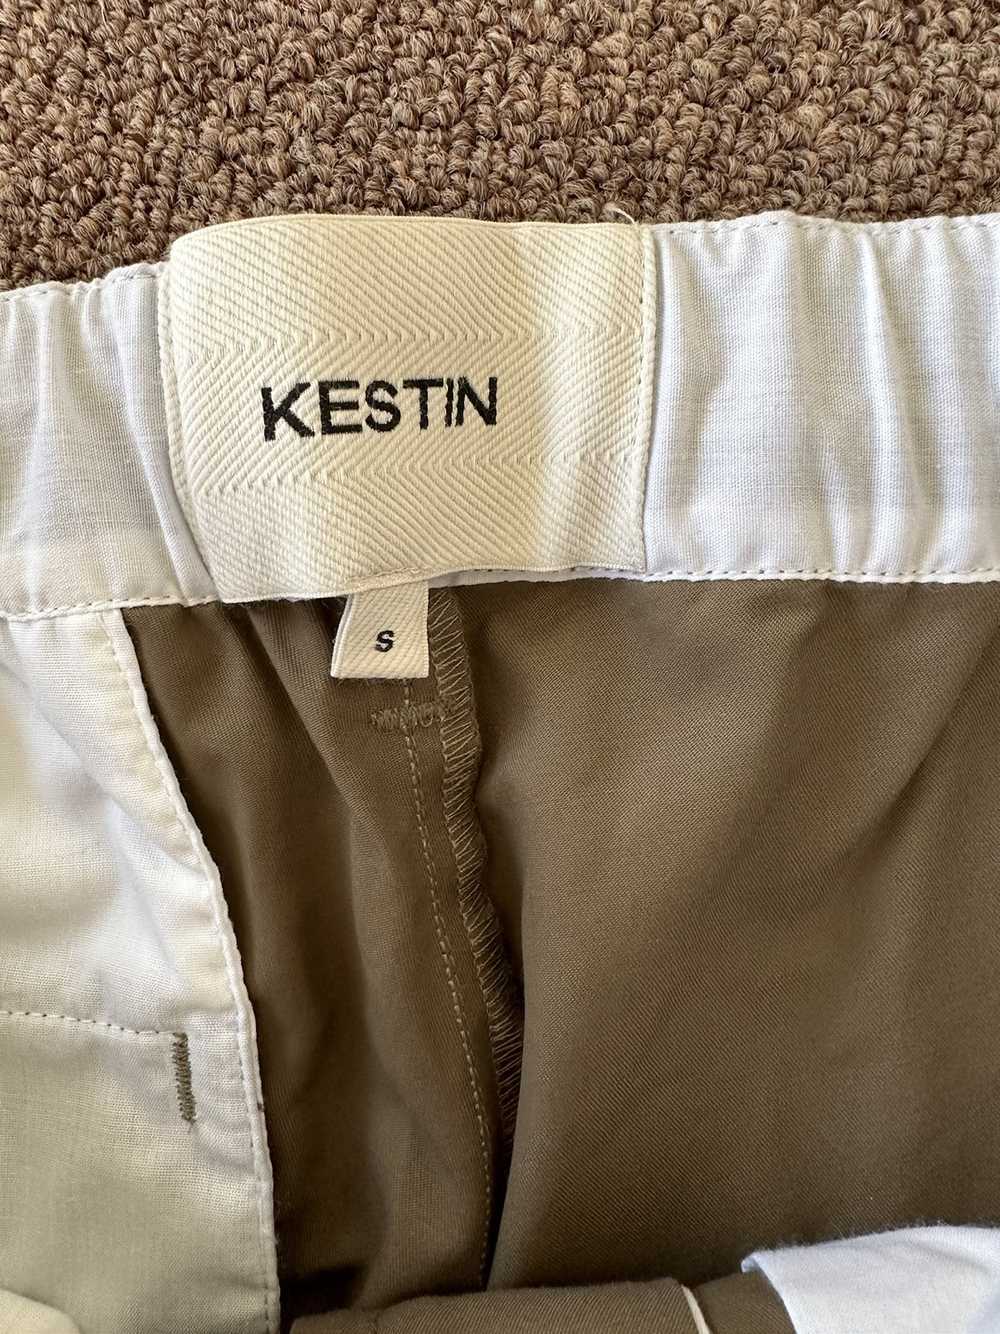 Kestin Hare Olive Water Repellent Pants - image 4